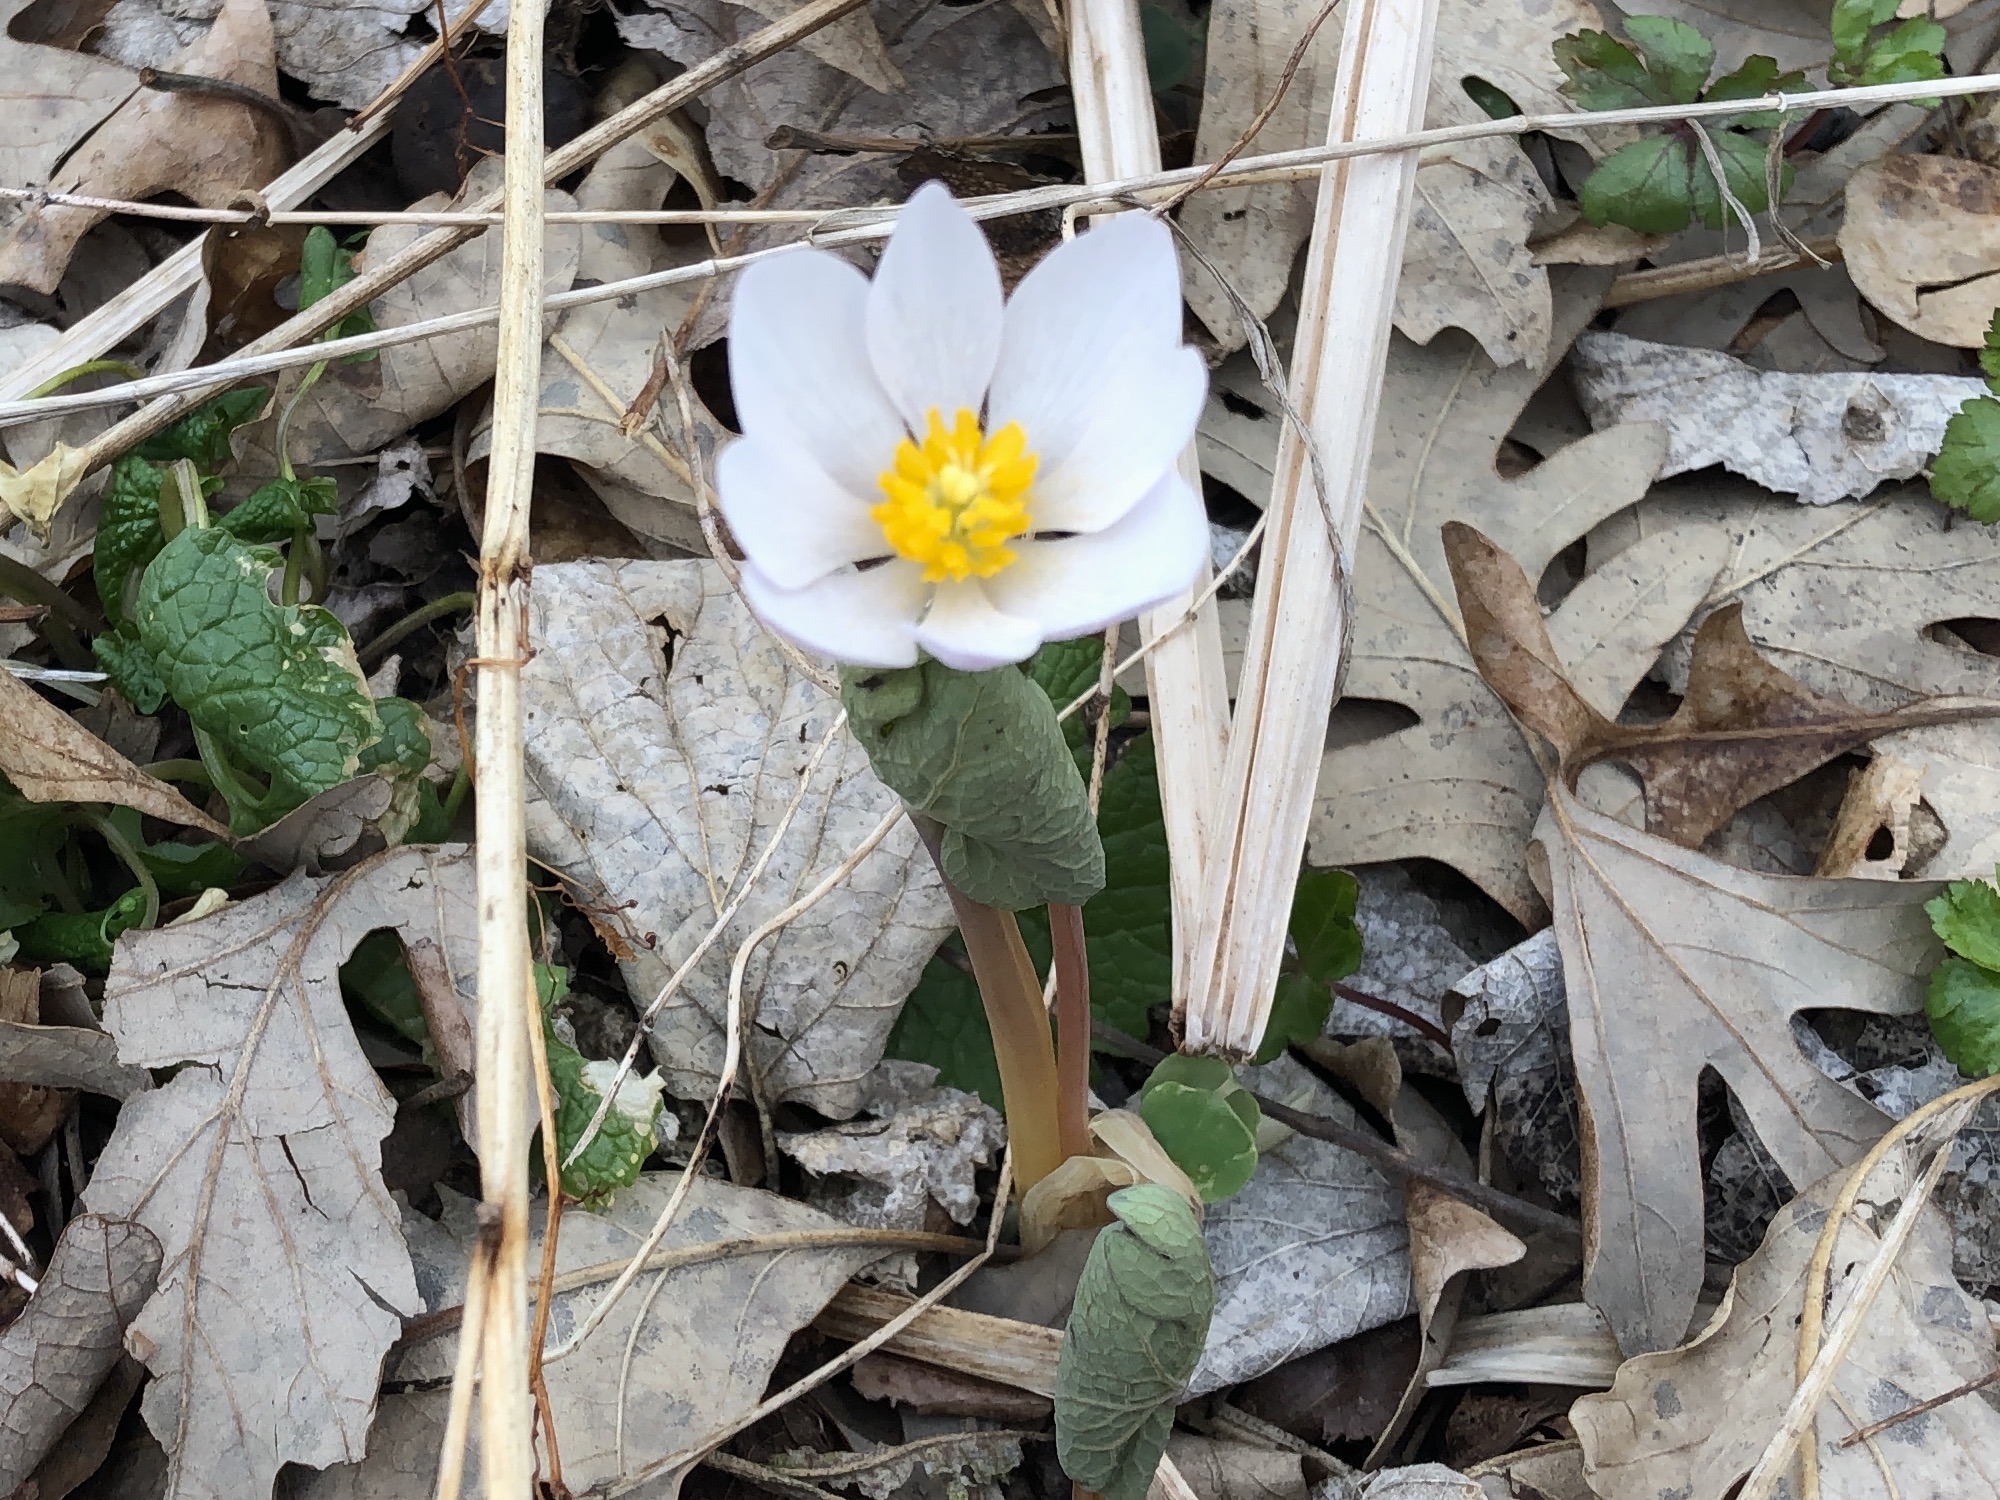 Bloodroot photo taken on April 18, 2019 in Madison, Wisconsin near Council Ring.